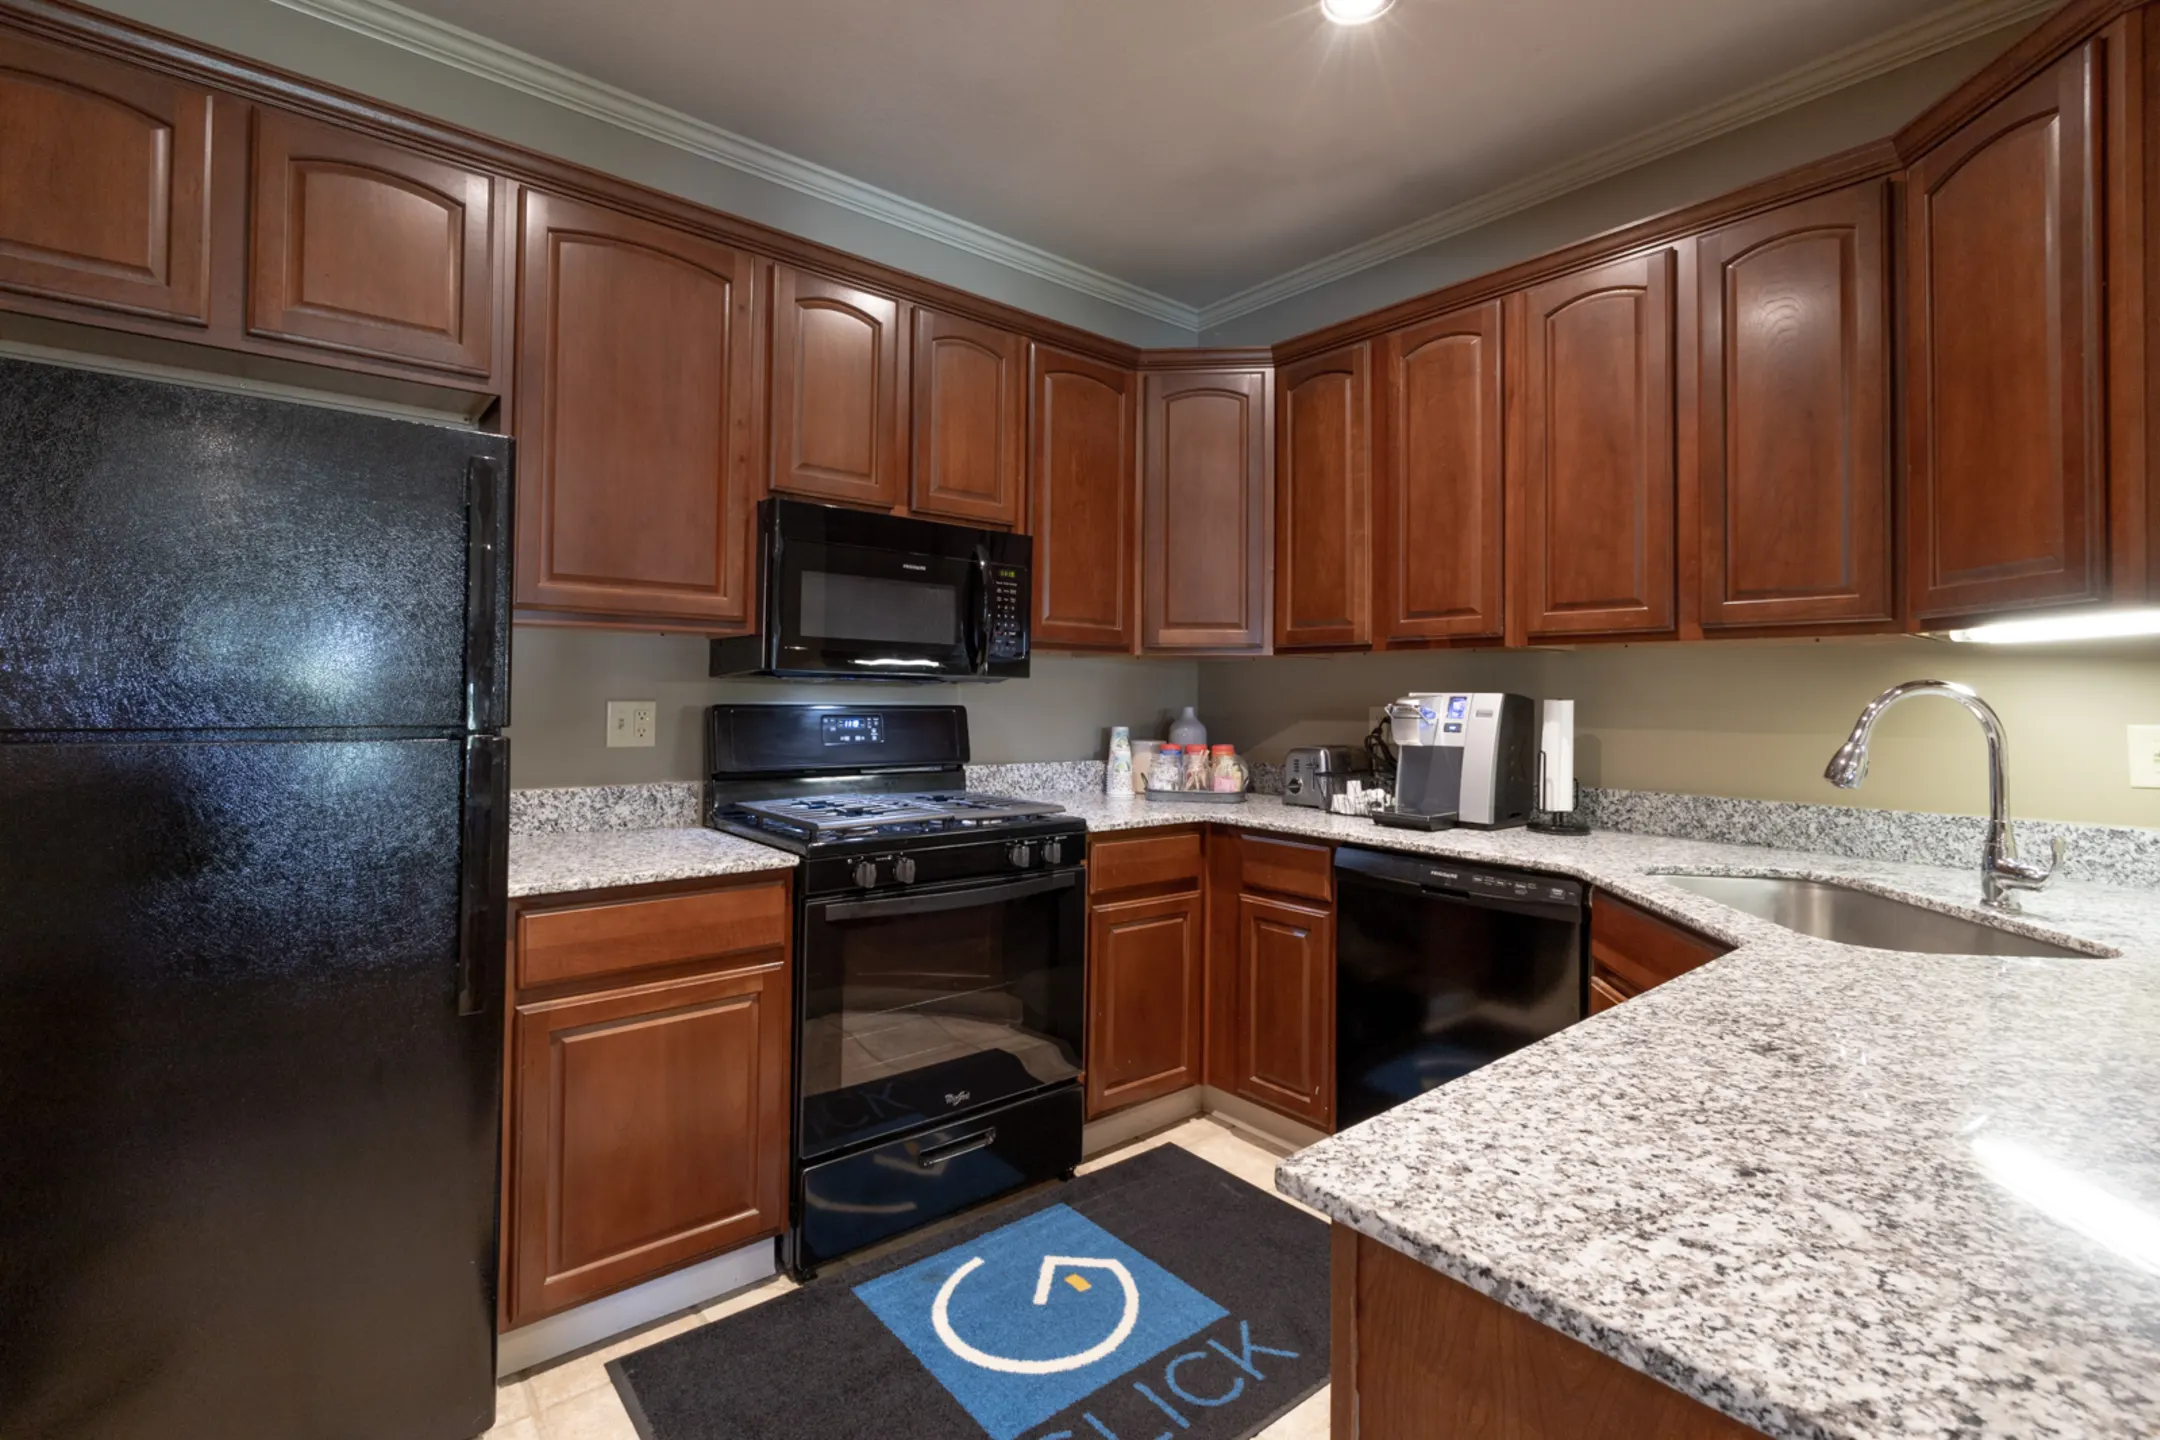 Kitchen - Archer's Pointe Apartments of Fort Wayne - Fort Wayne, IN